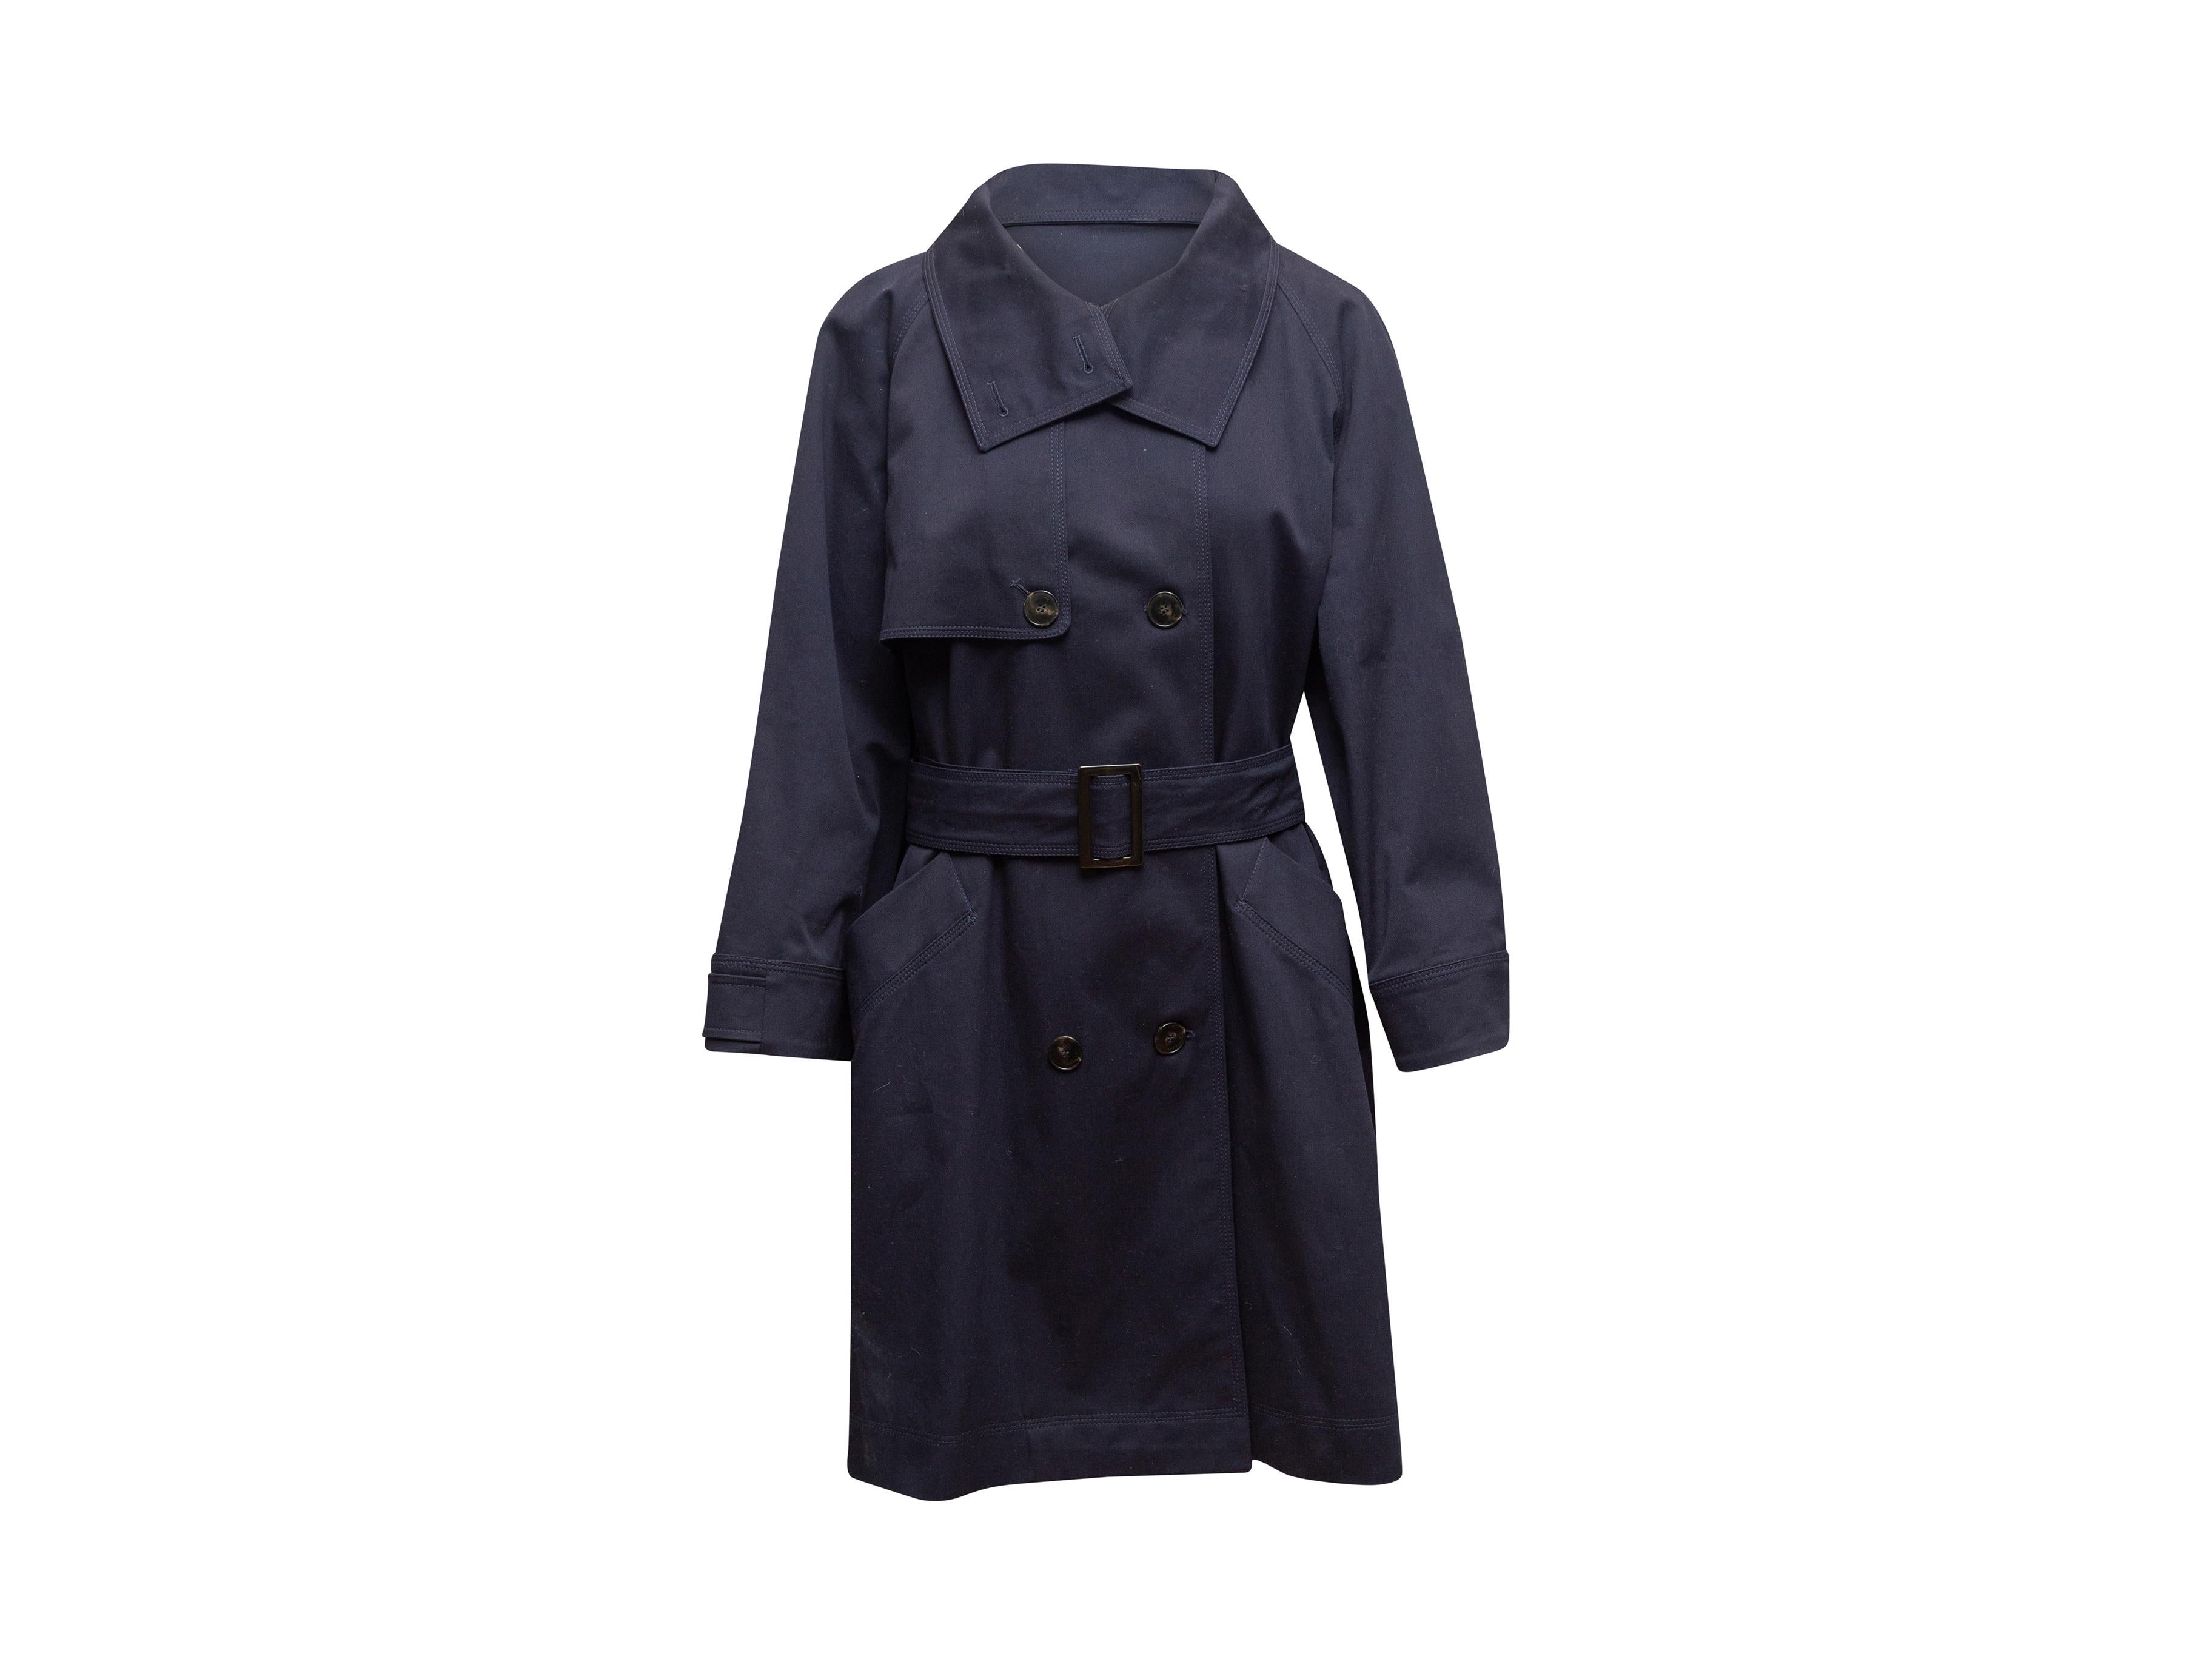 Product details: Navy cotton double-breasted trench coat by Marella. Dual hip pockets. Button closures at front. 46